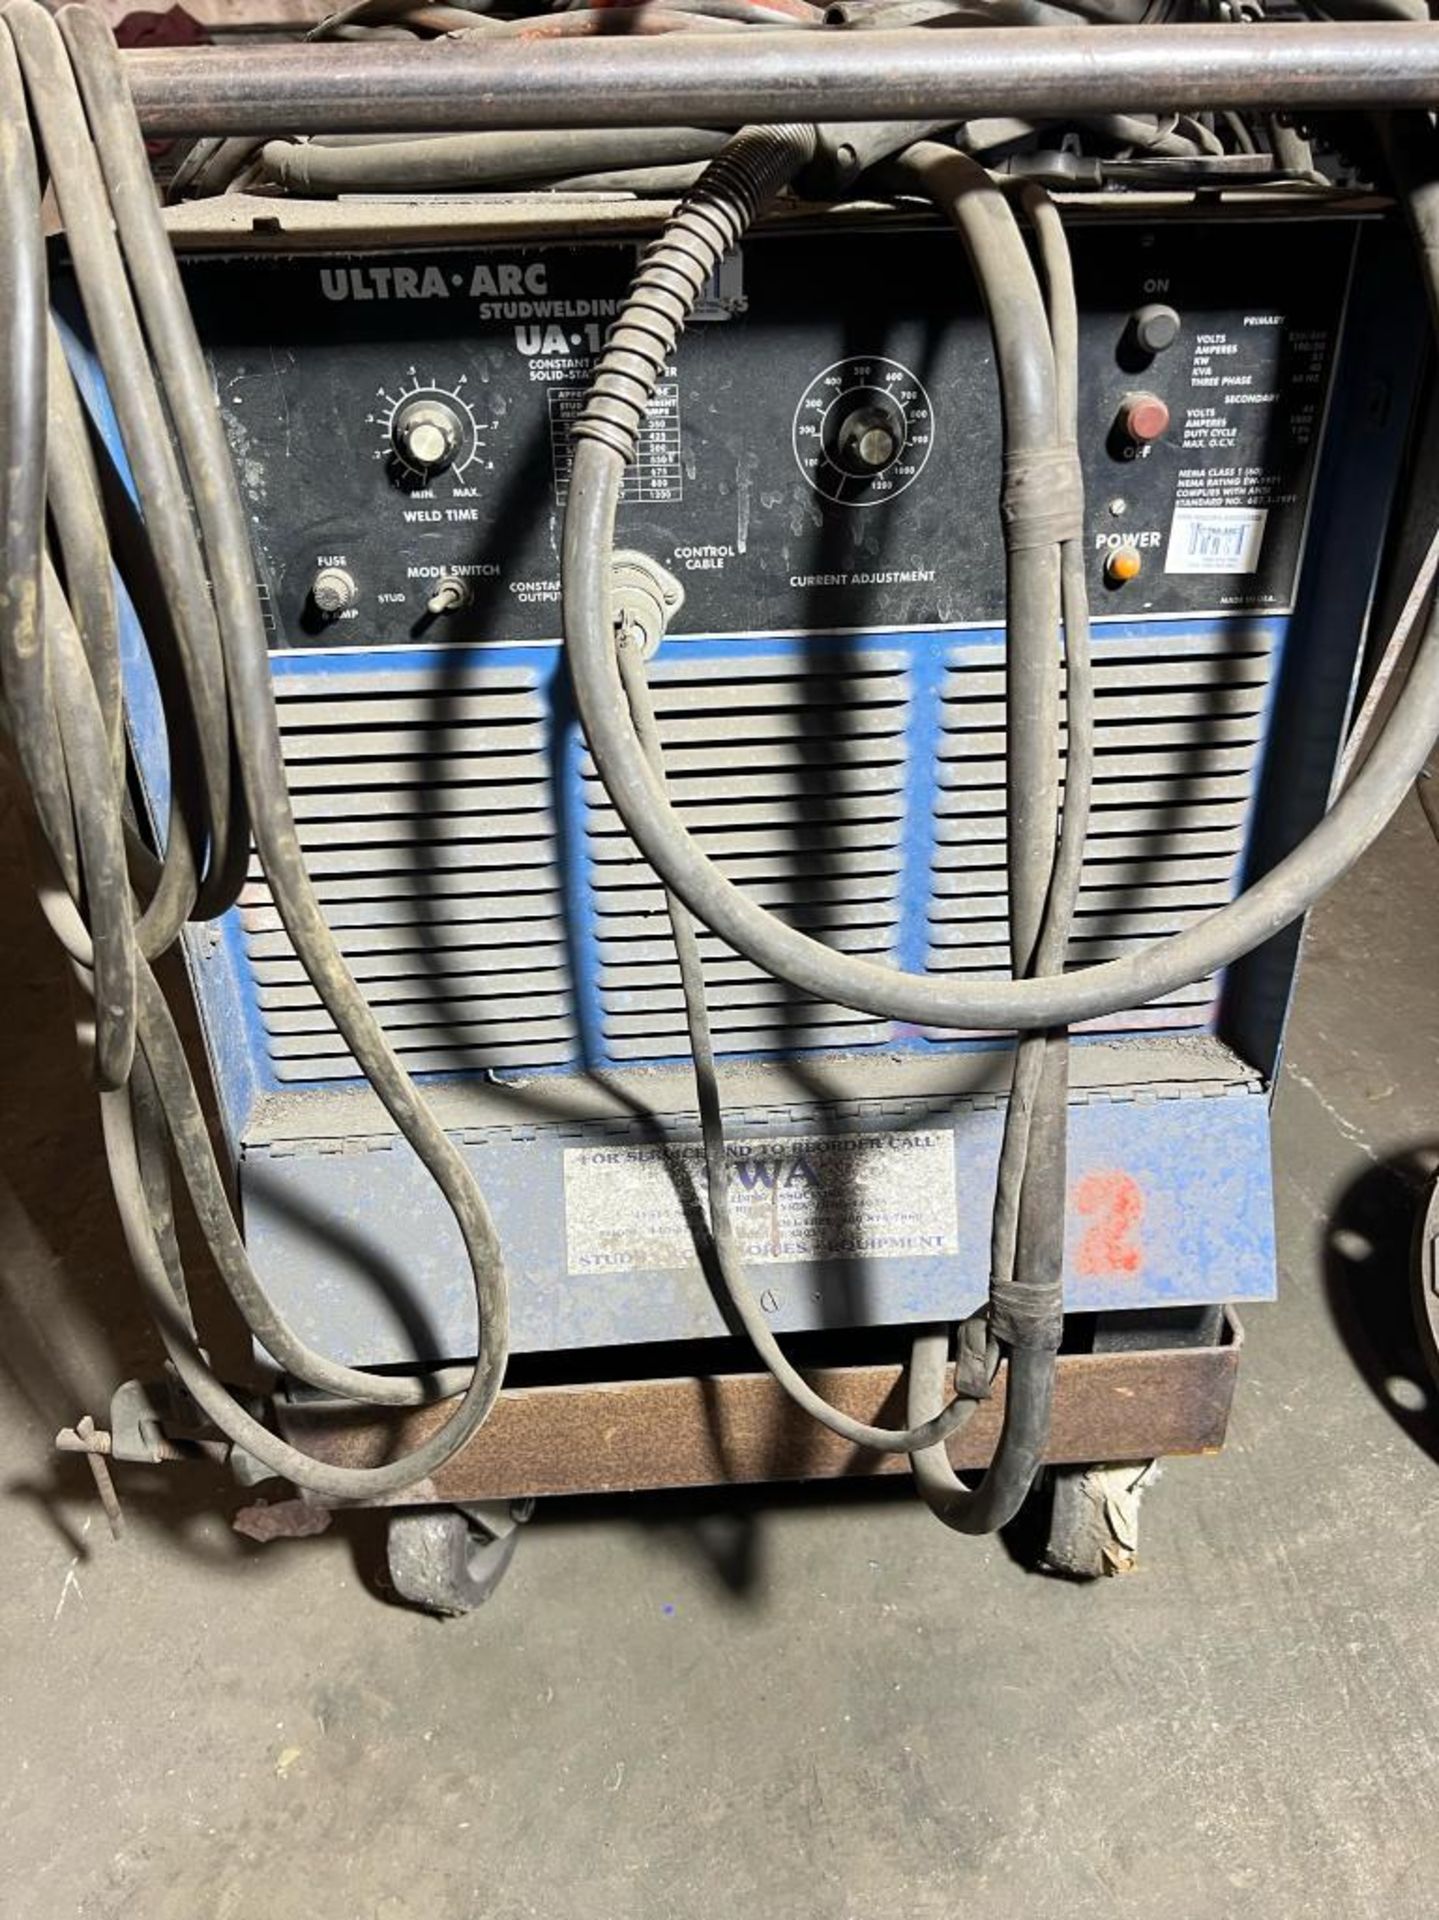 Ultra-Arc Stud Welder, UA-1000, with Leads, Single Phase - Image 2 of 4